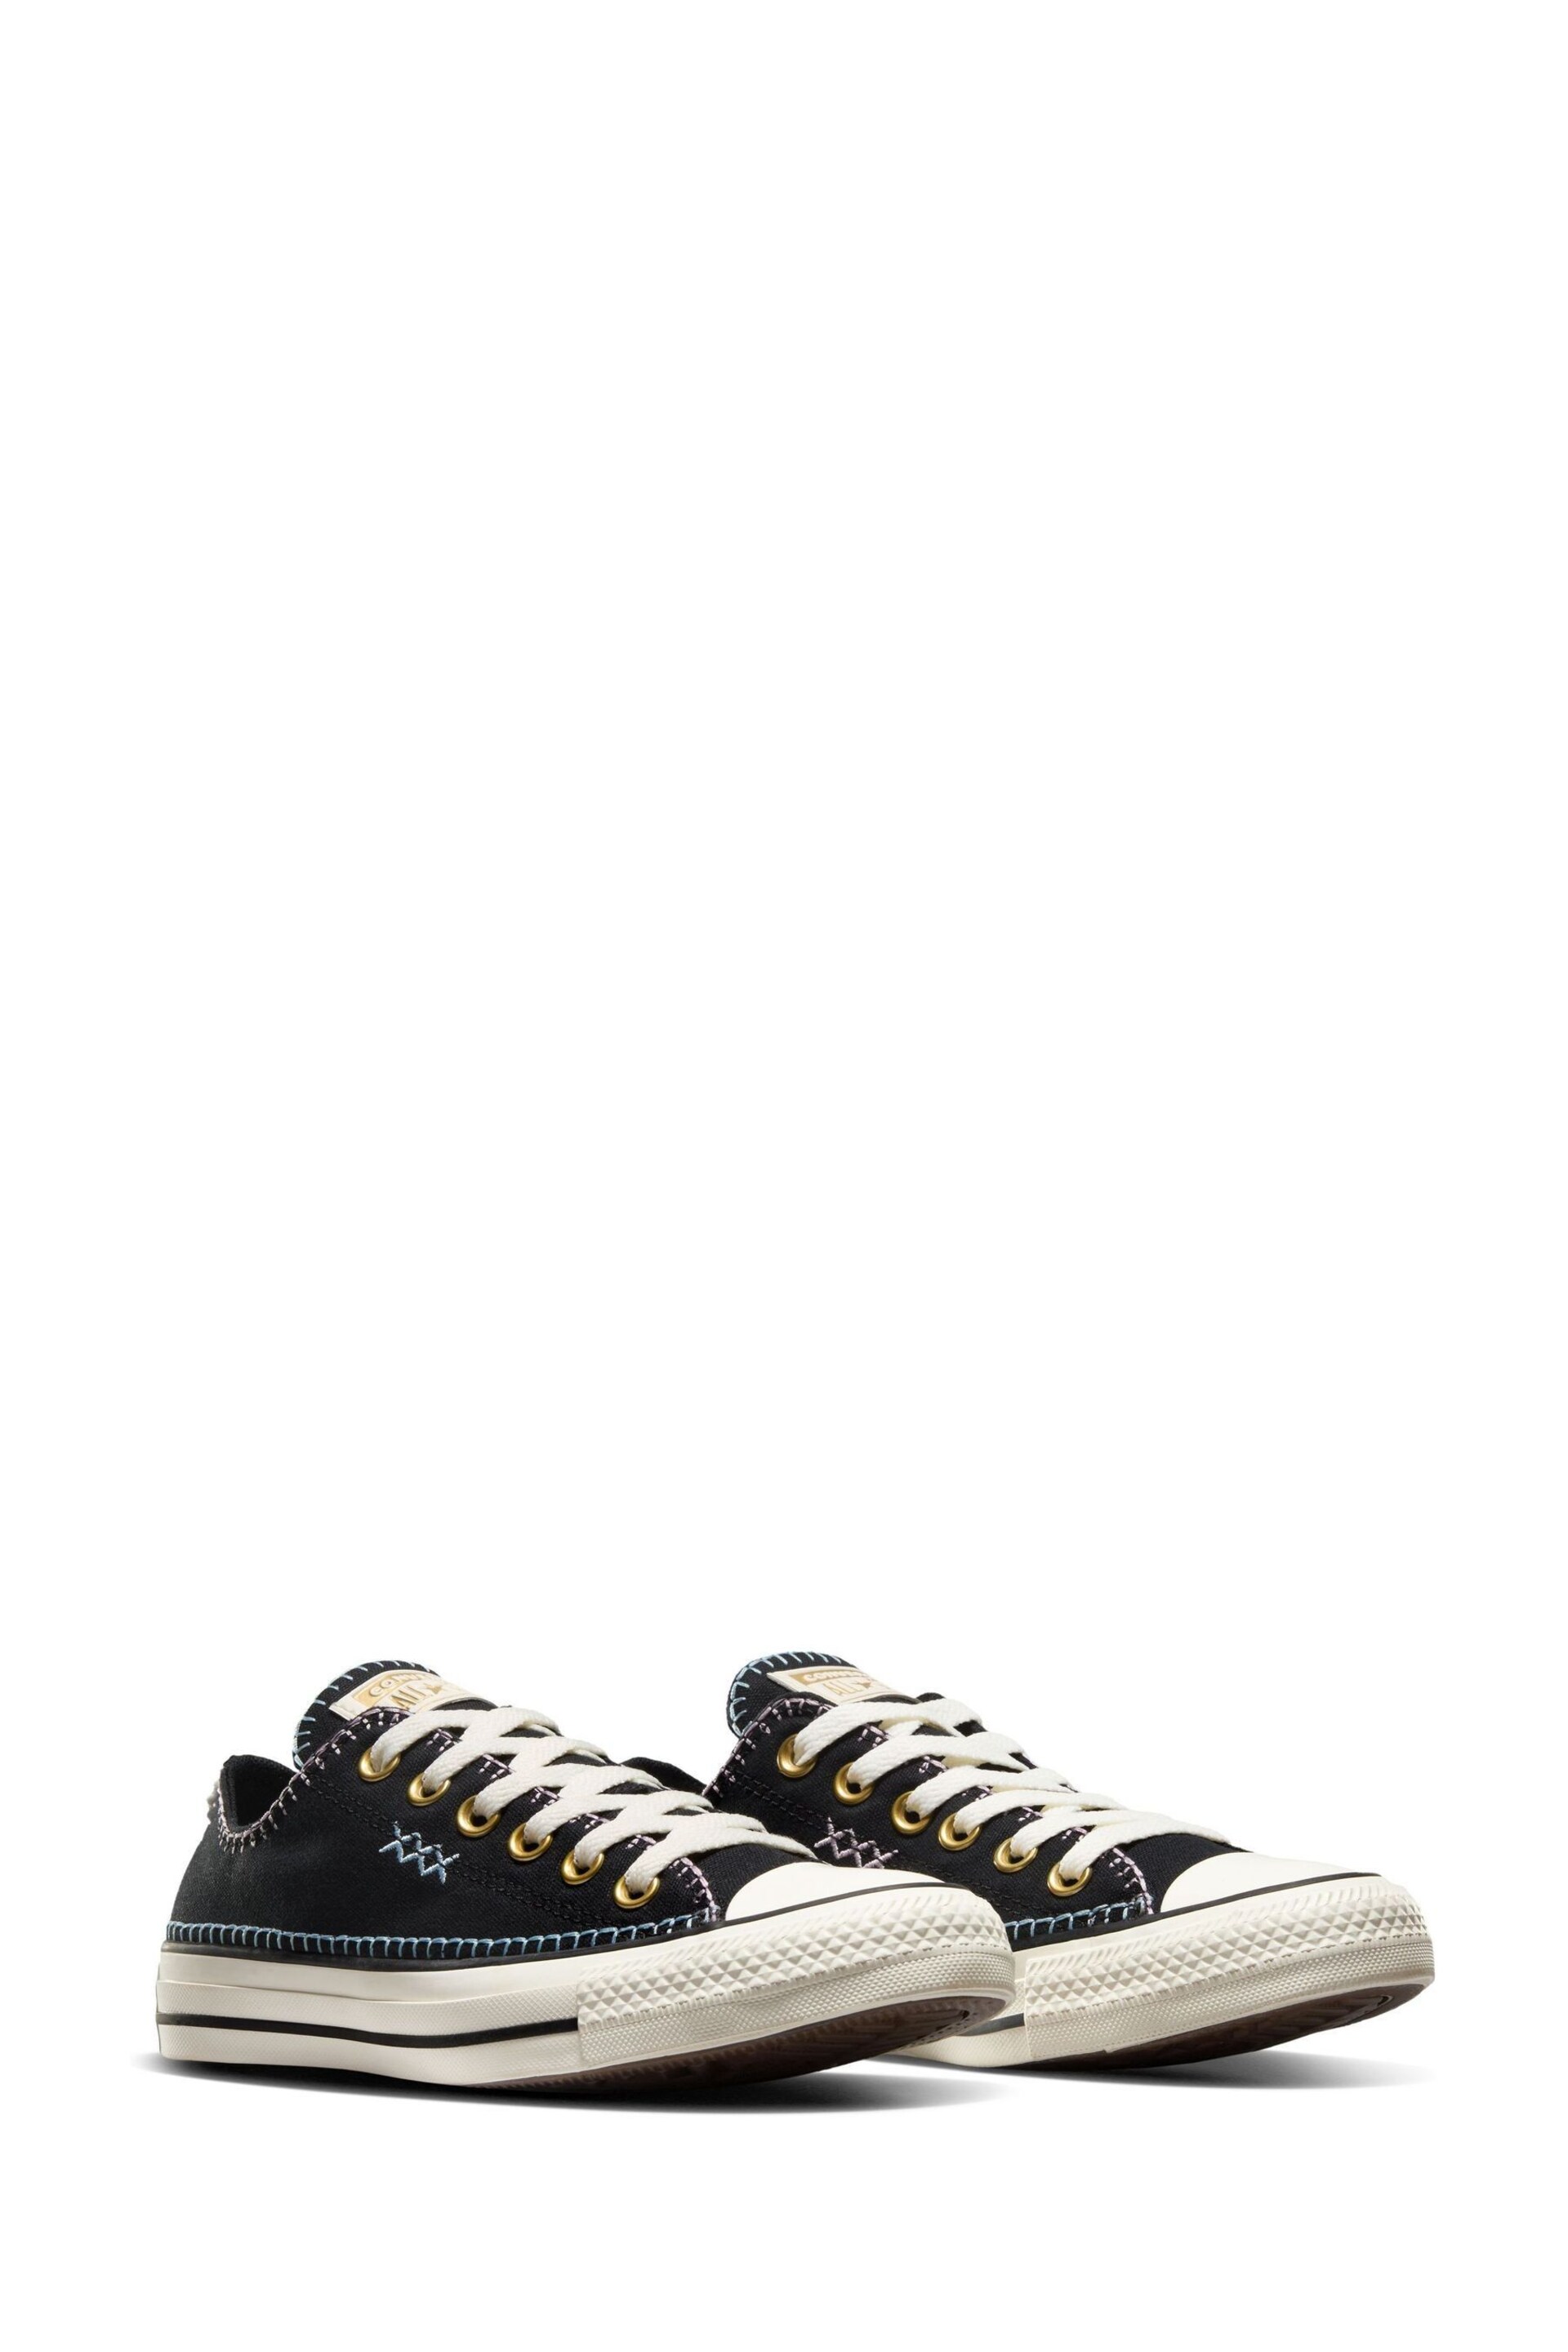 Converse Black Chuck Taylor All Star Crafted Stitching Ox Trainers - Image 4 of 10